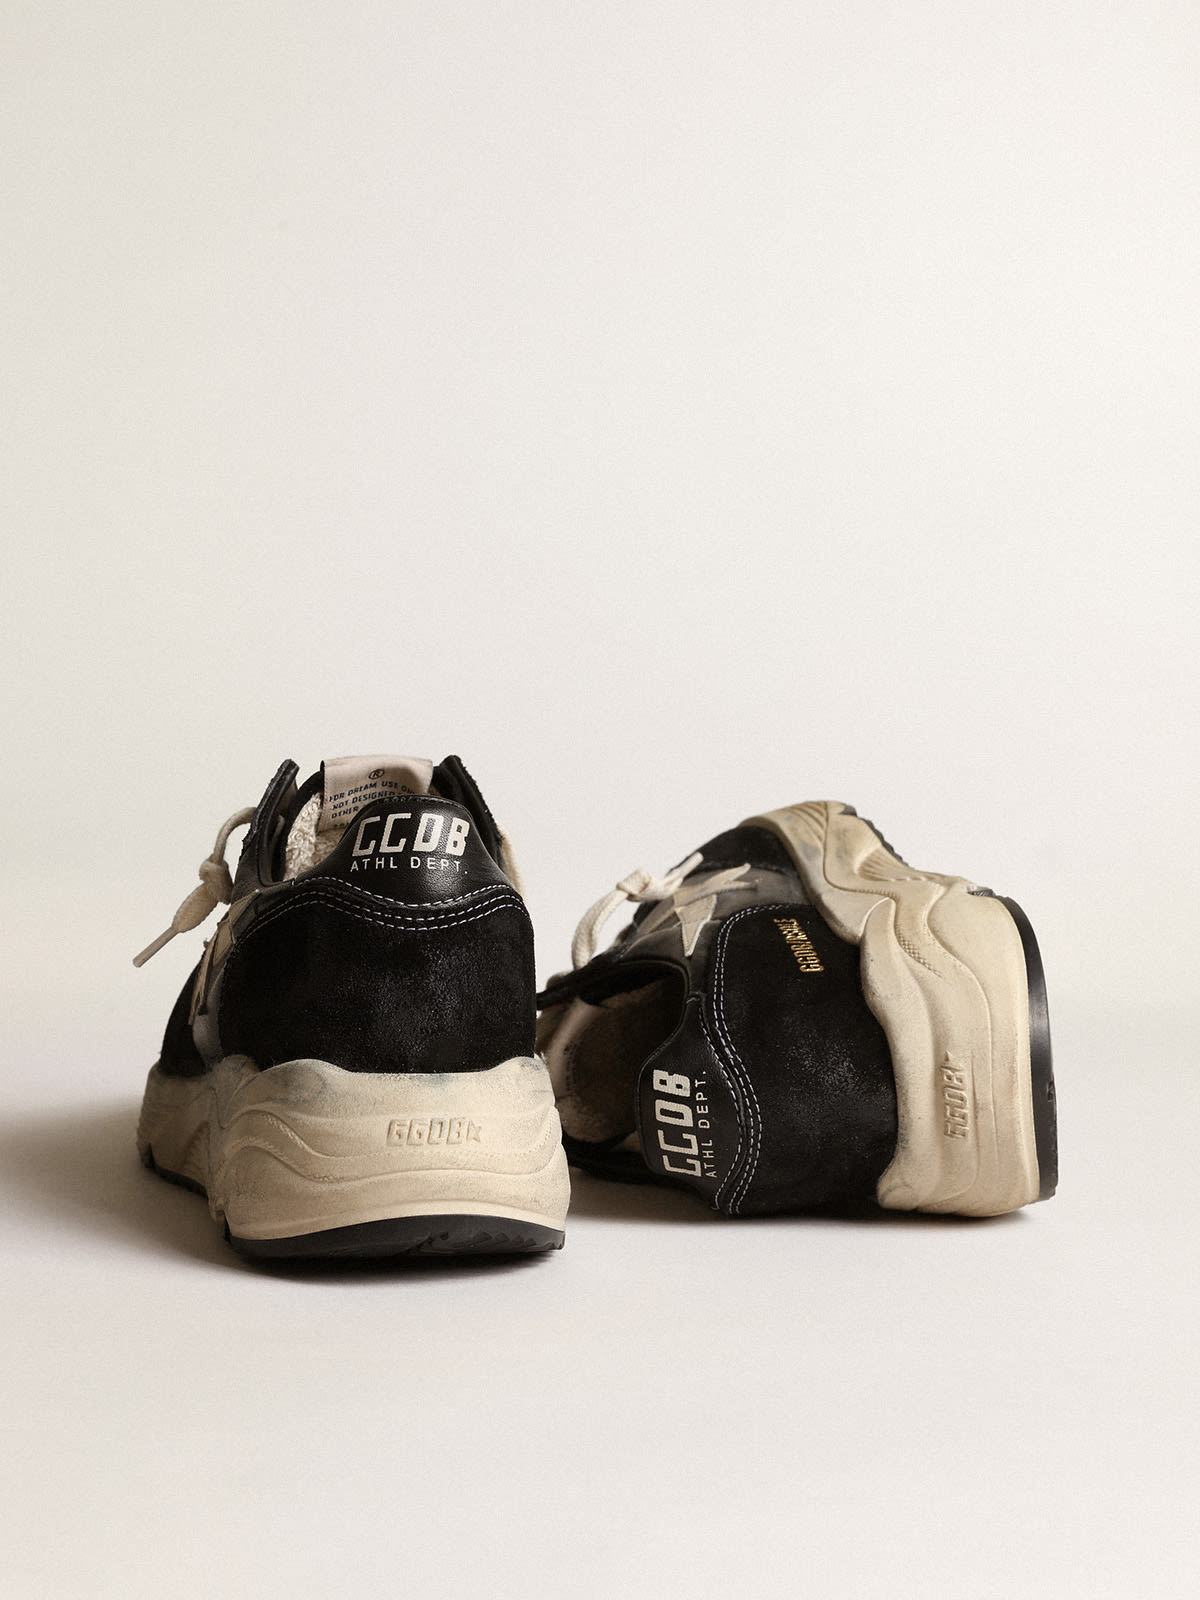 Golden Goose - Women's Running Sole in black nappa and suede in 